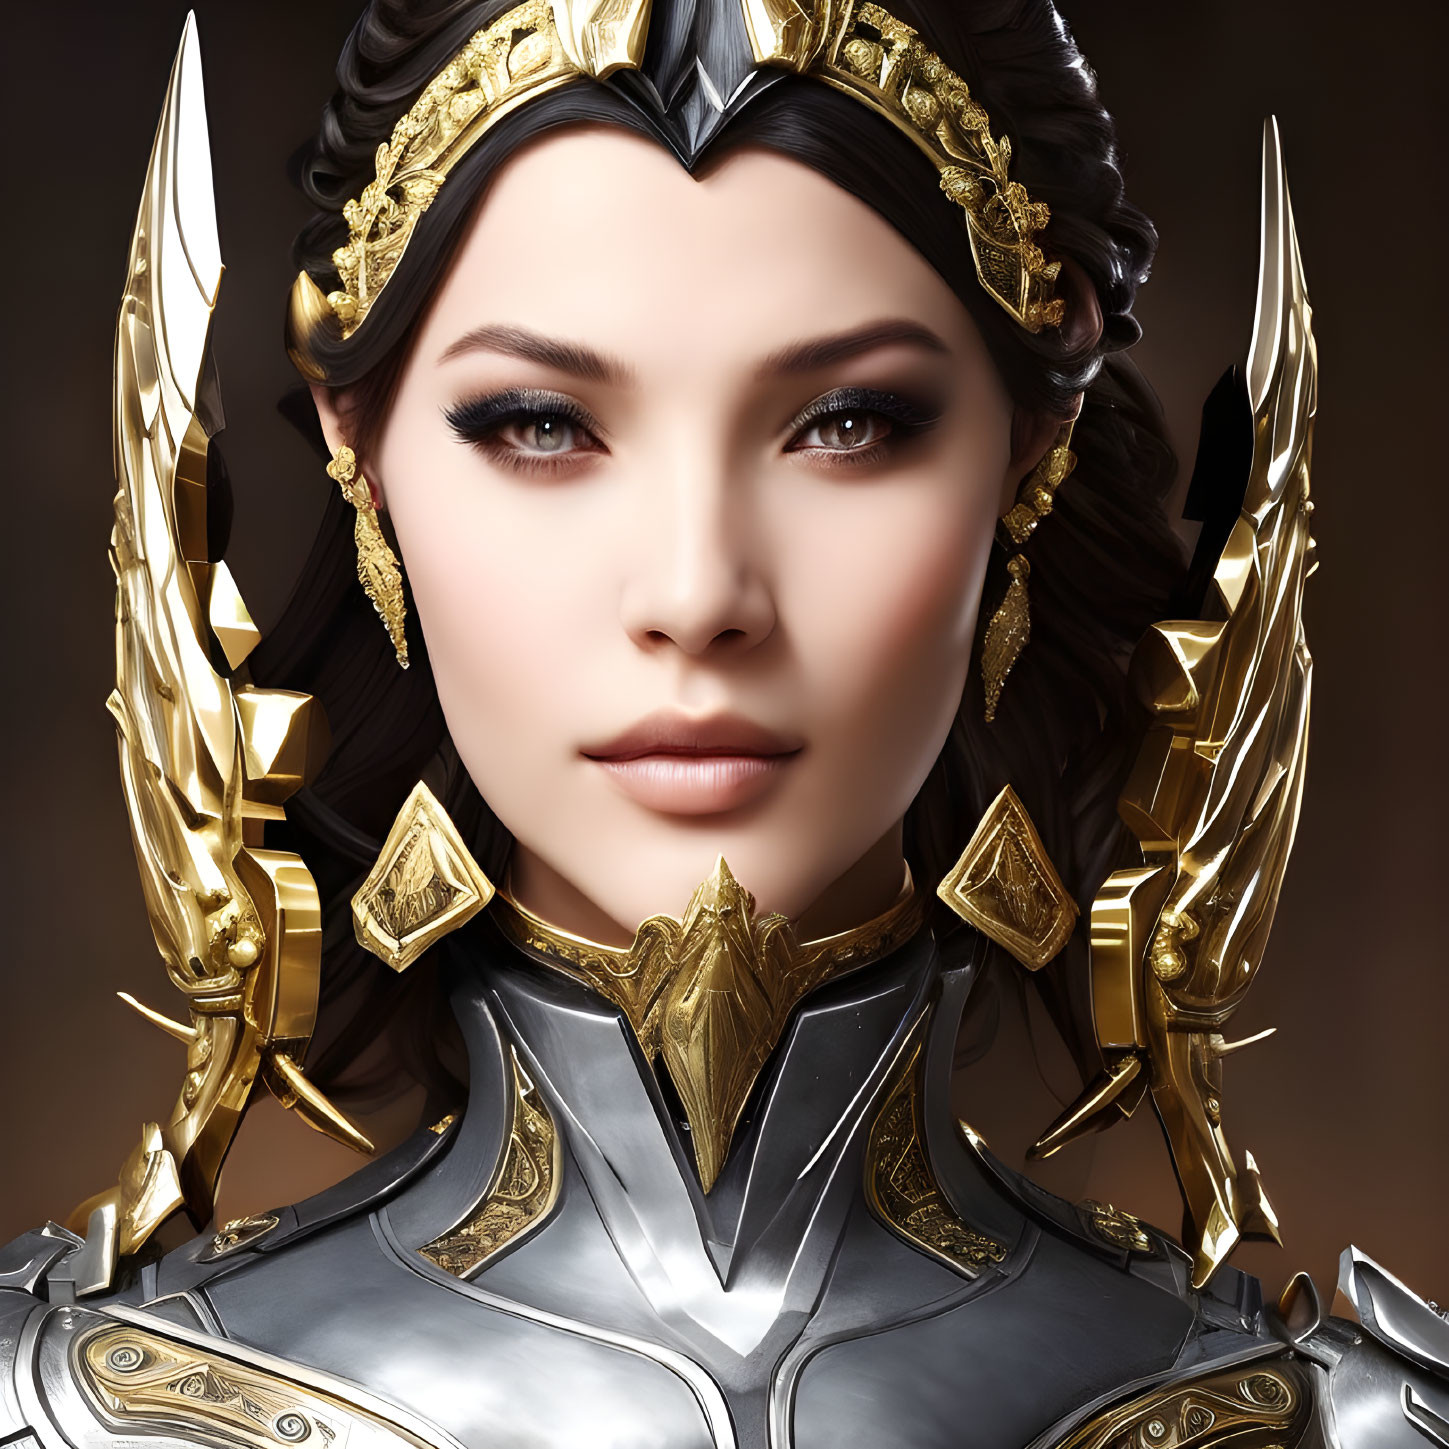 Portrait of woman with striking makeup in golden headgear and armor on dark background